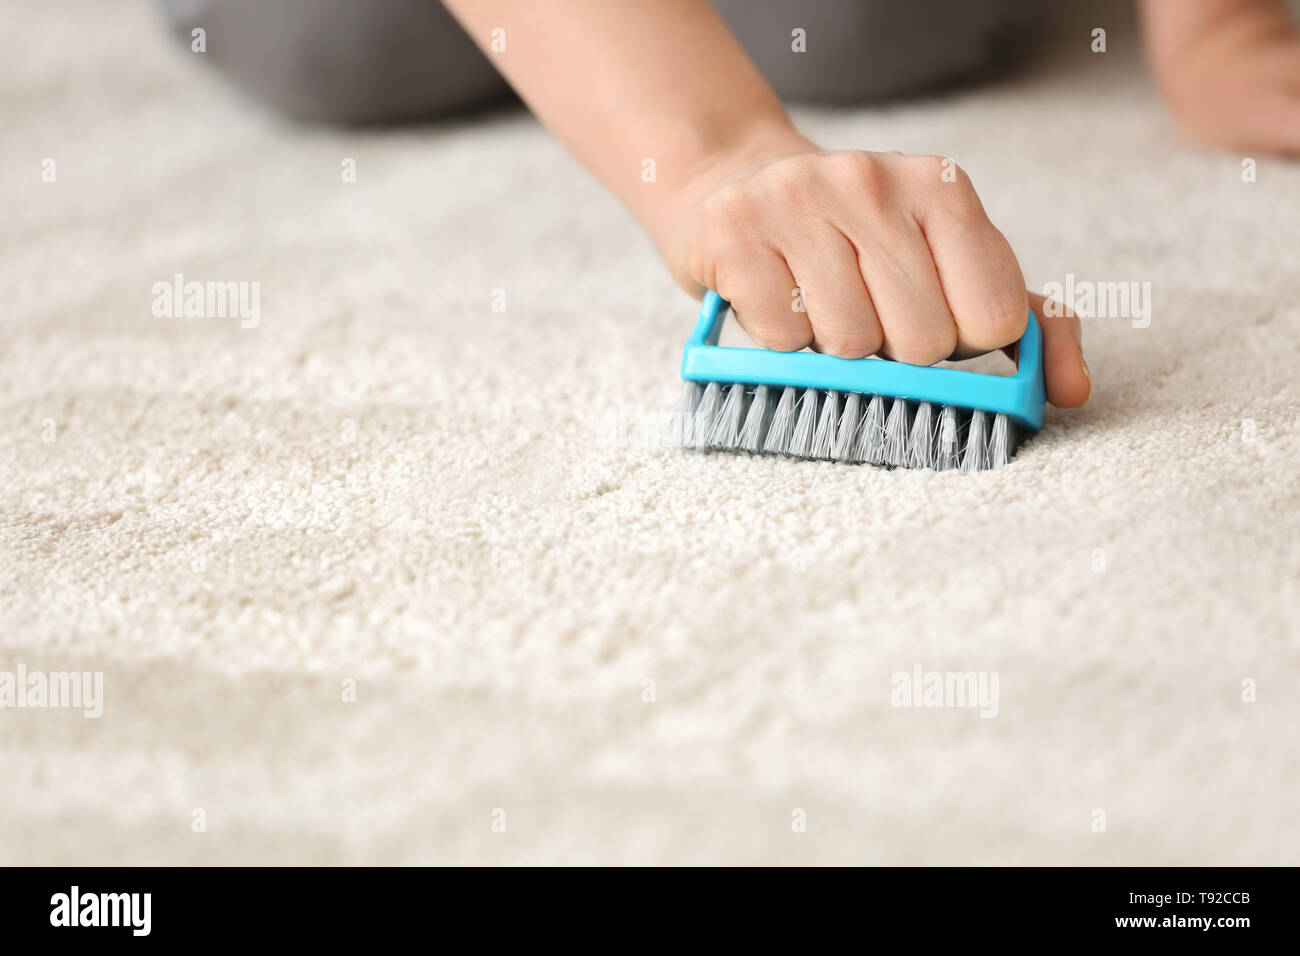 Woman cleaning carpet with brush at home Stock Photo - Alamy